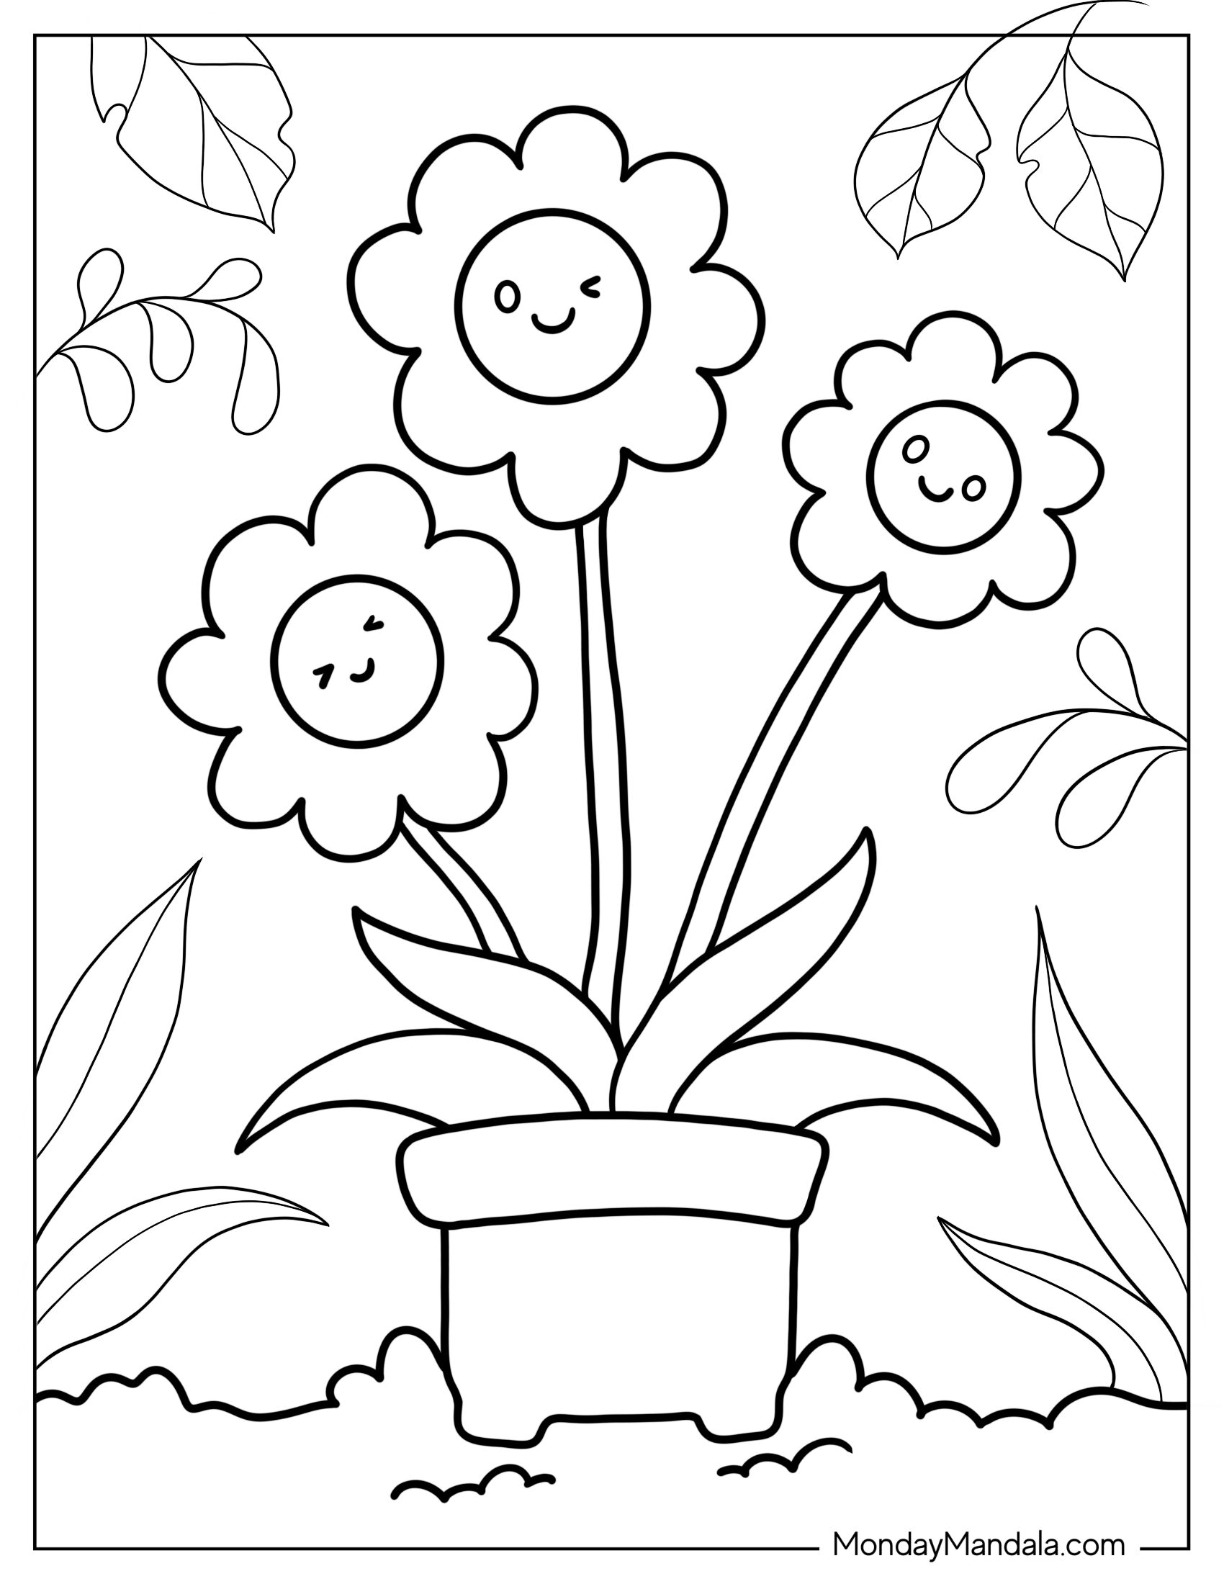 Flower coloring pages free pdf printables